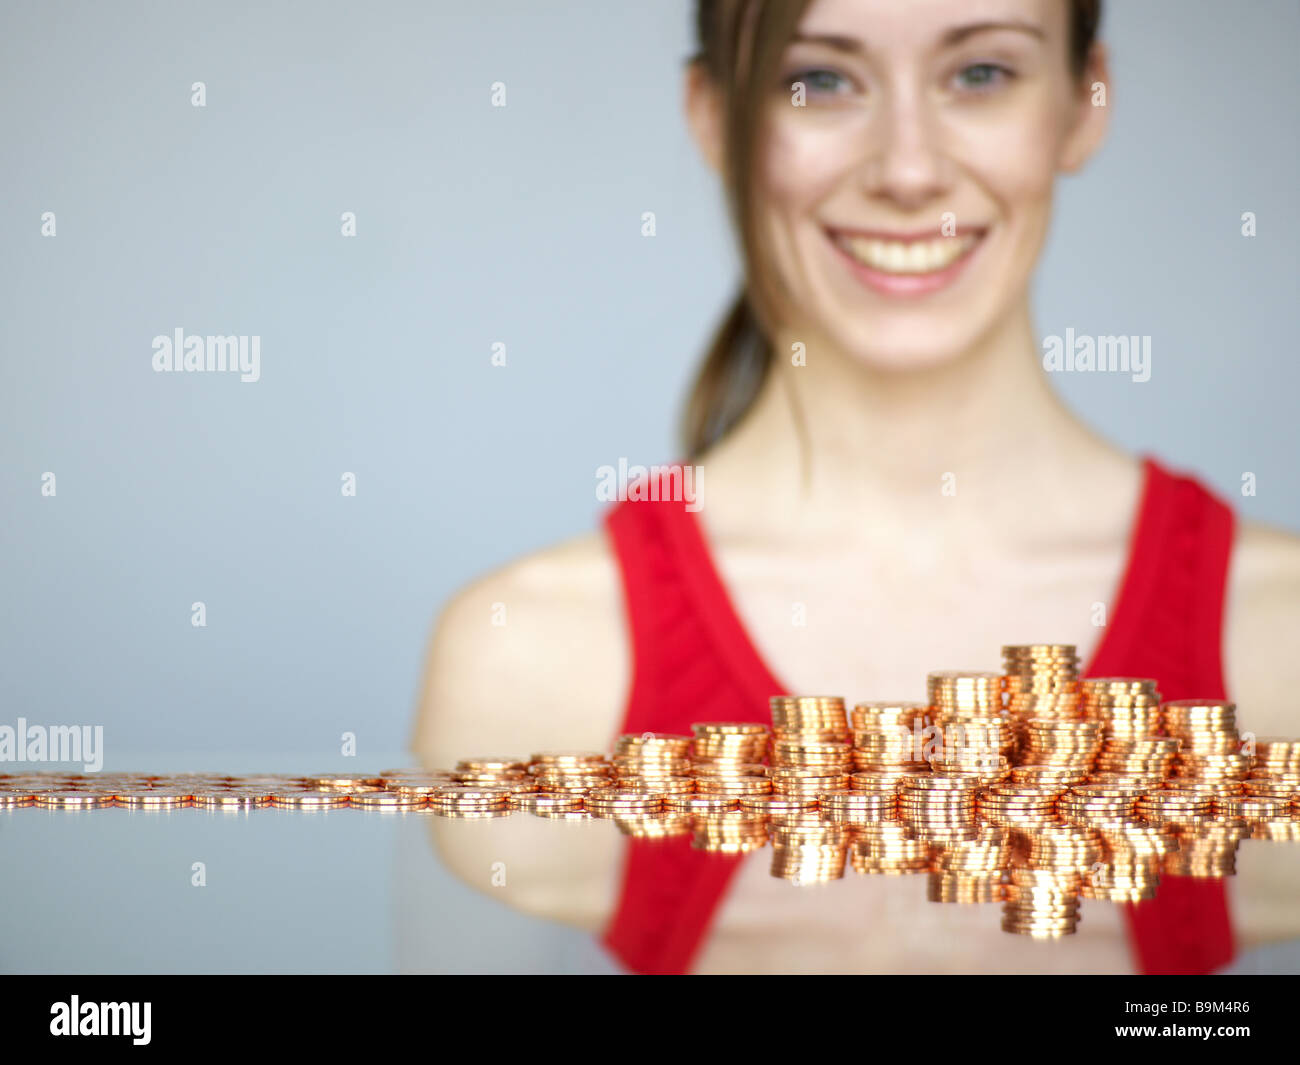 female model with two pence coins Stock Photo